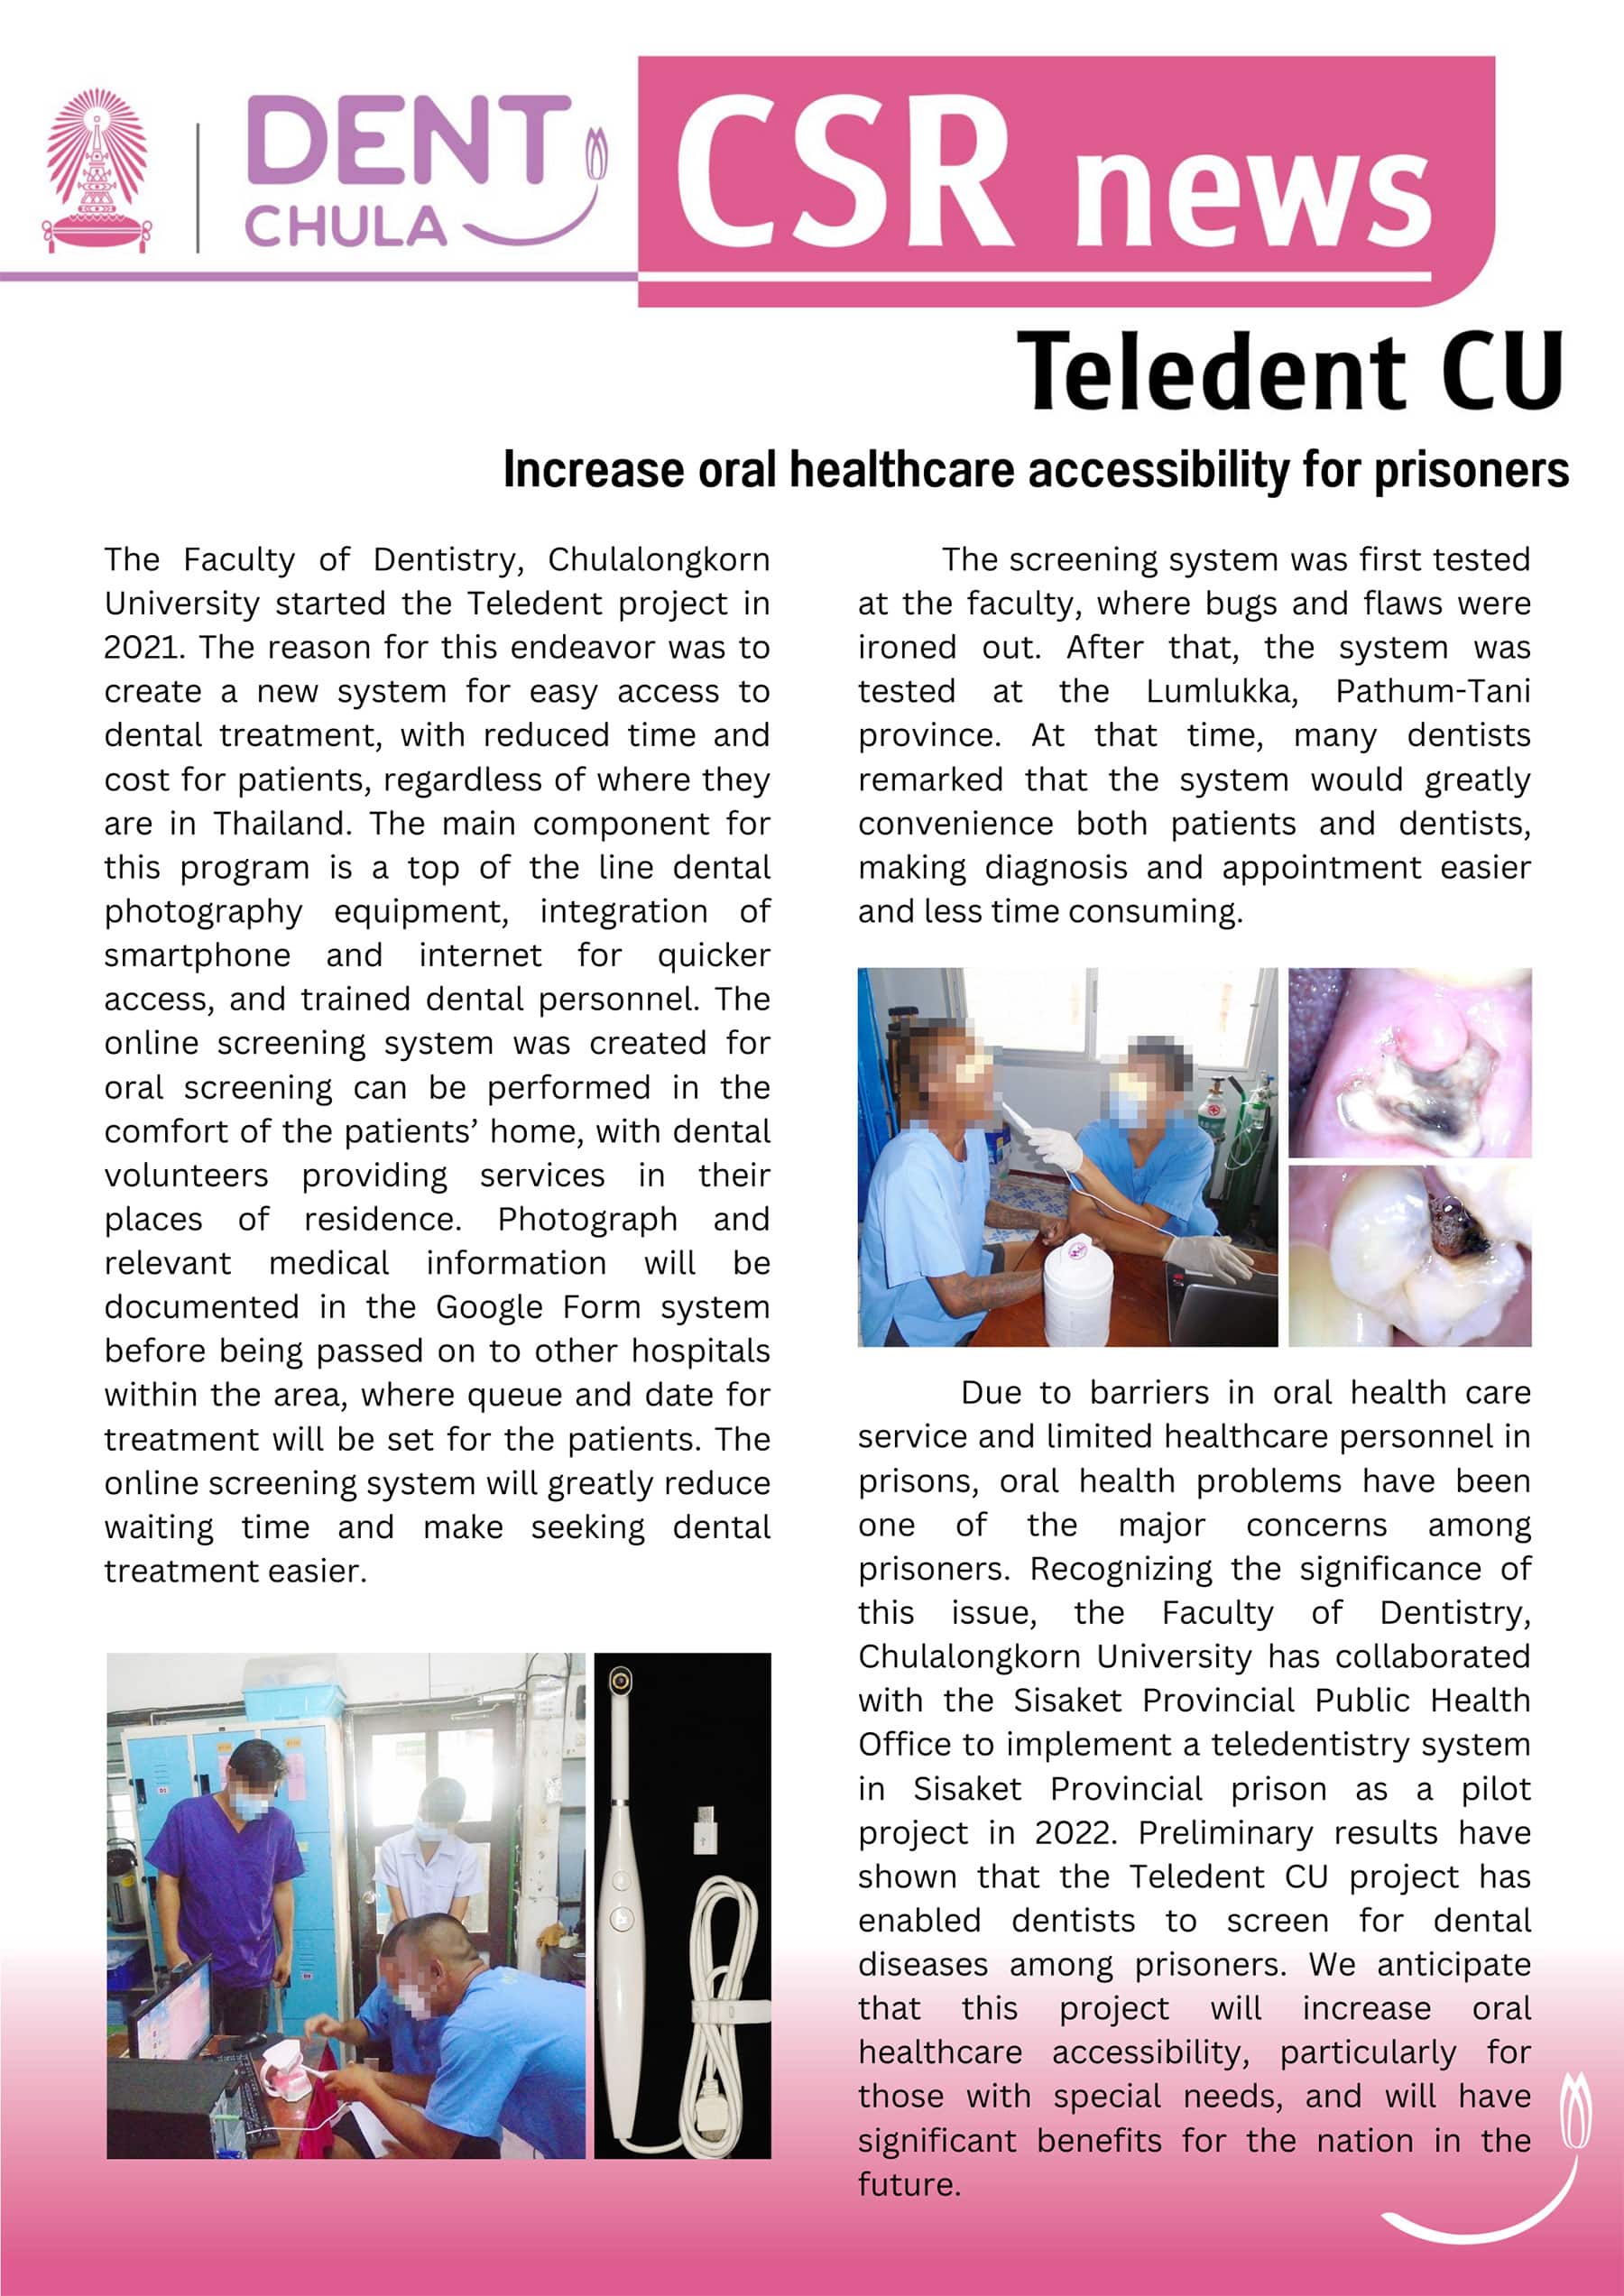 teledent cu increase oral healthcare accessibility for prisoners rev 2 Faculty of Dentistry, Chulalongkorn University